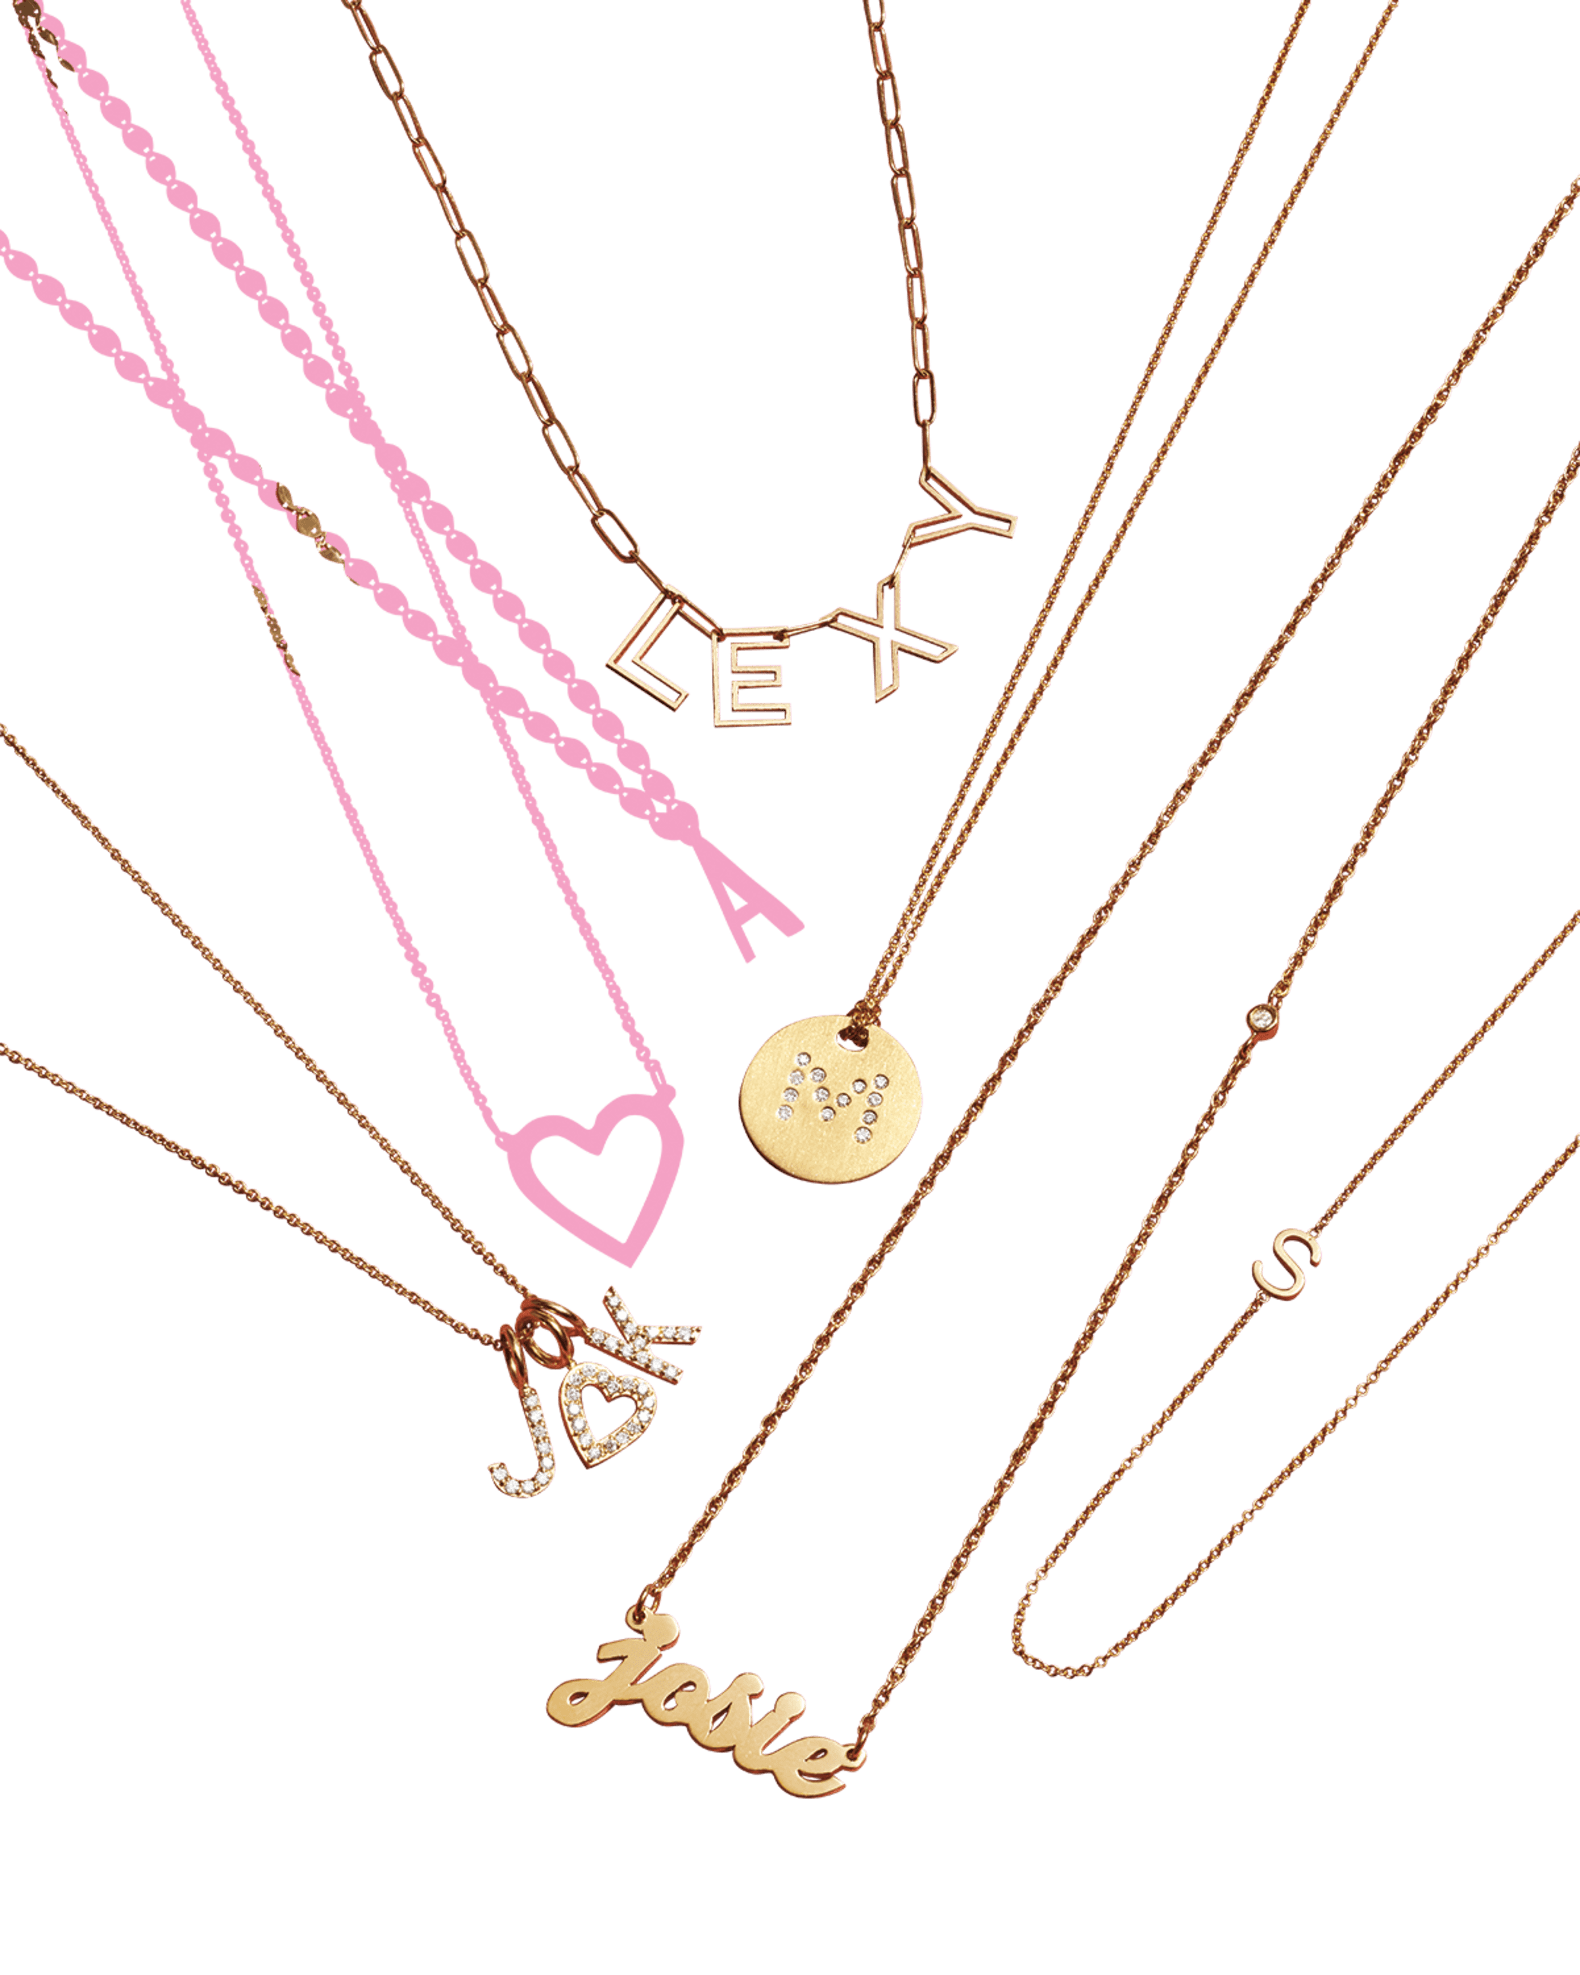 Sara's Story: A Necklace of Timeless Meaning and Joy – Maya Brenner